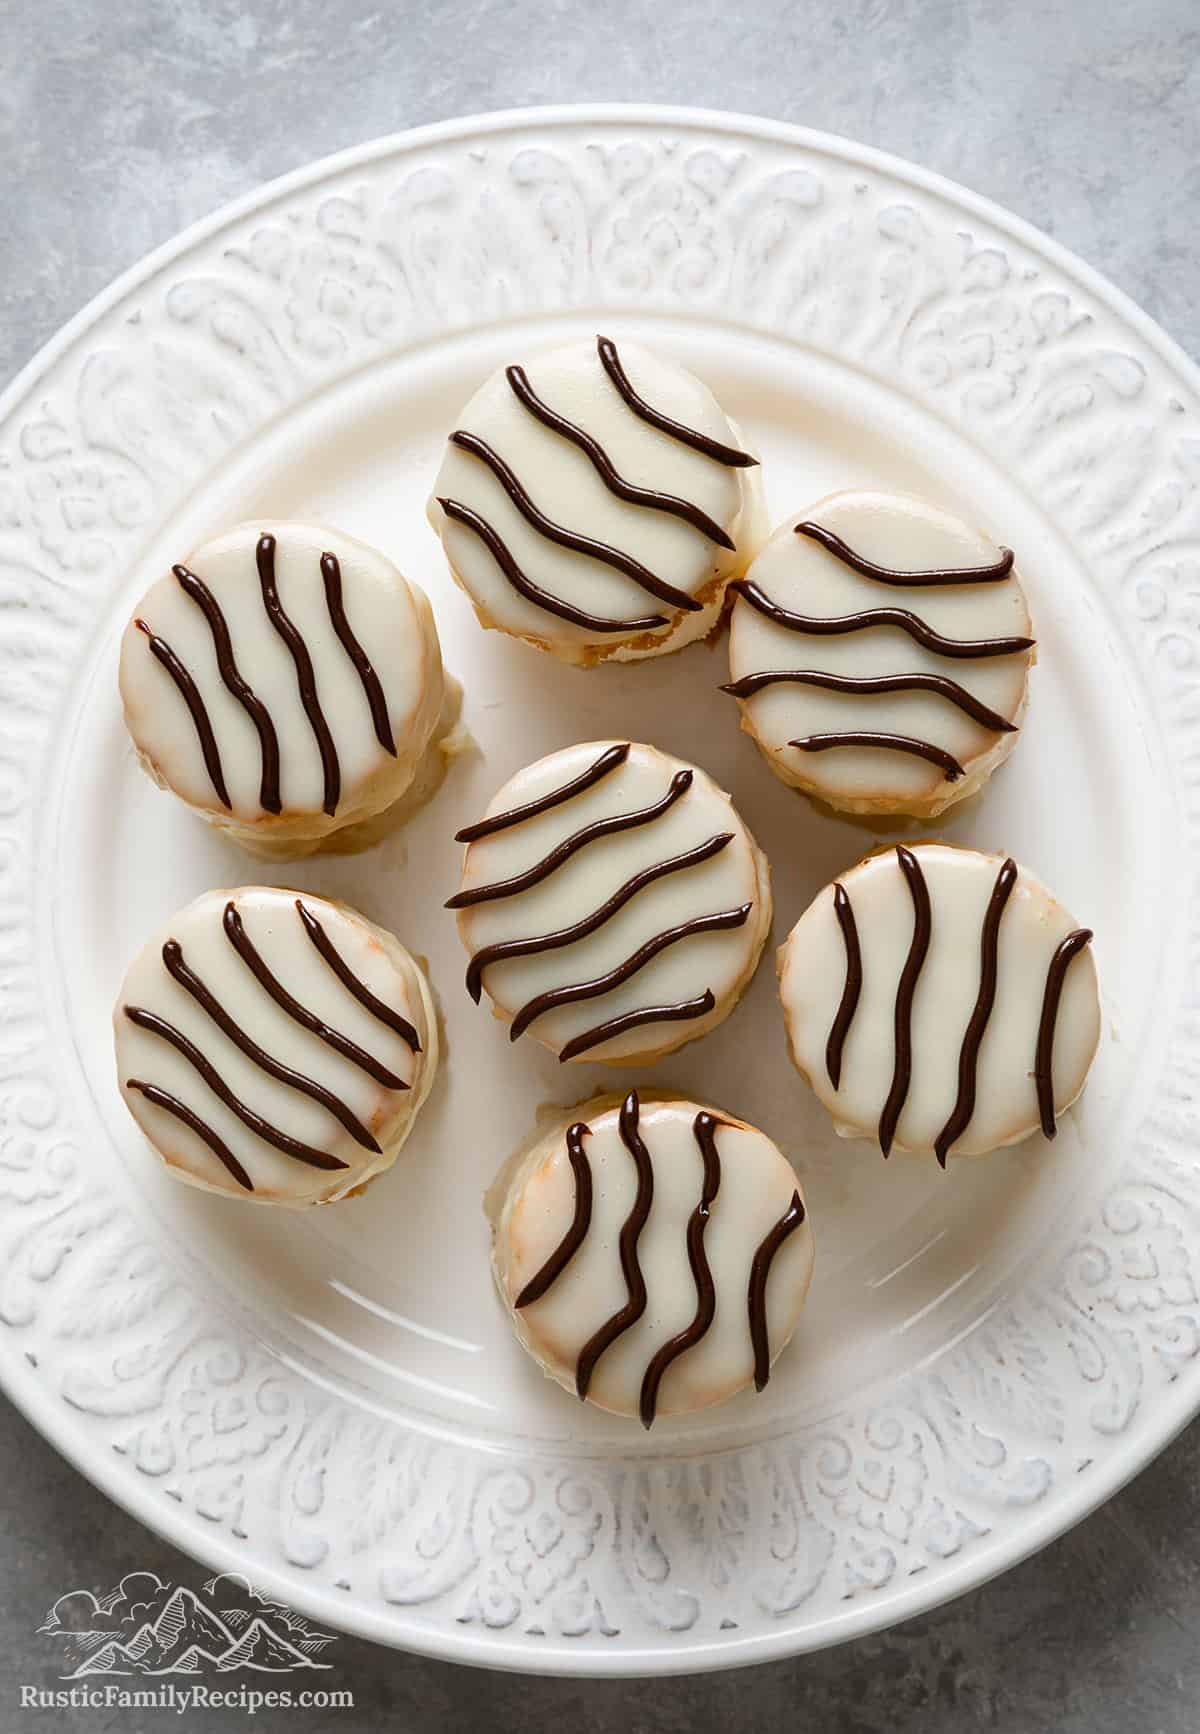 Decorated zebra cakes on a plate.